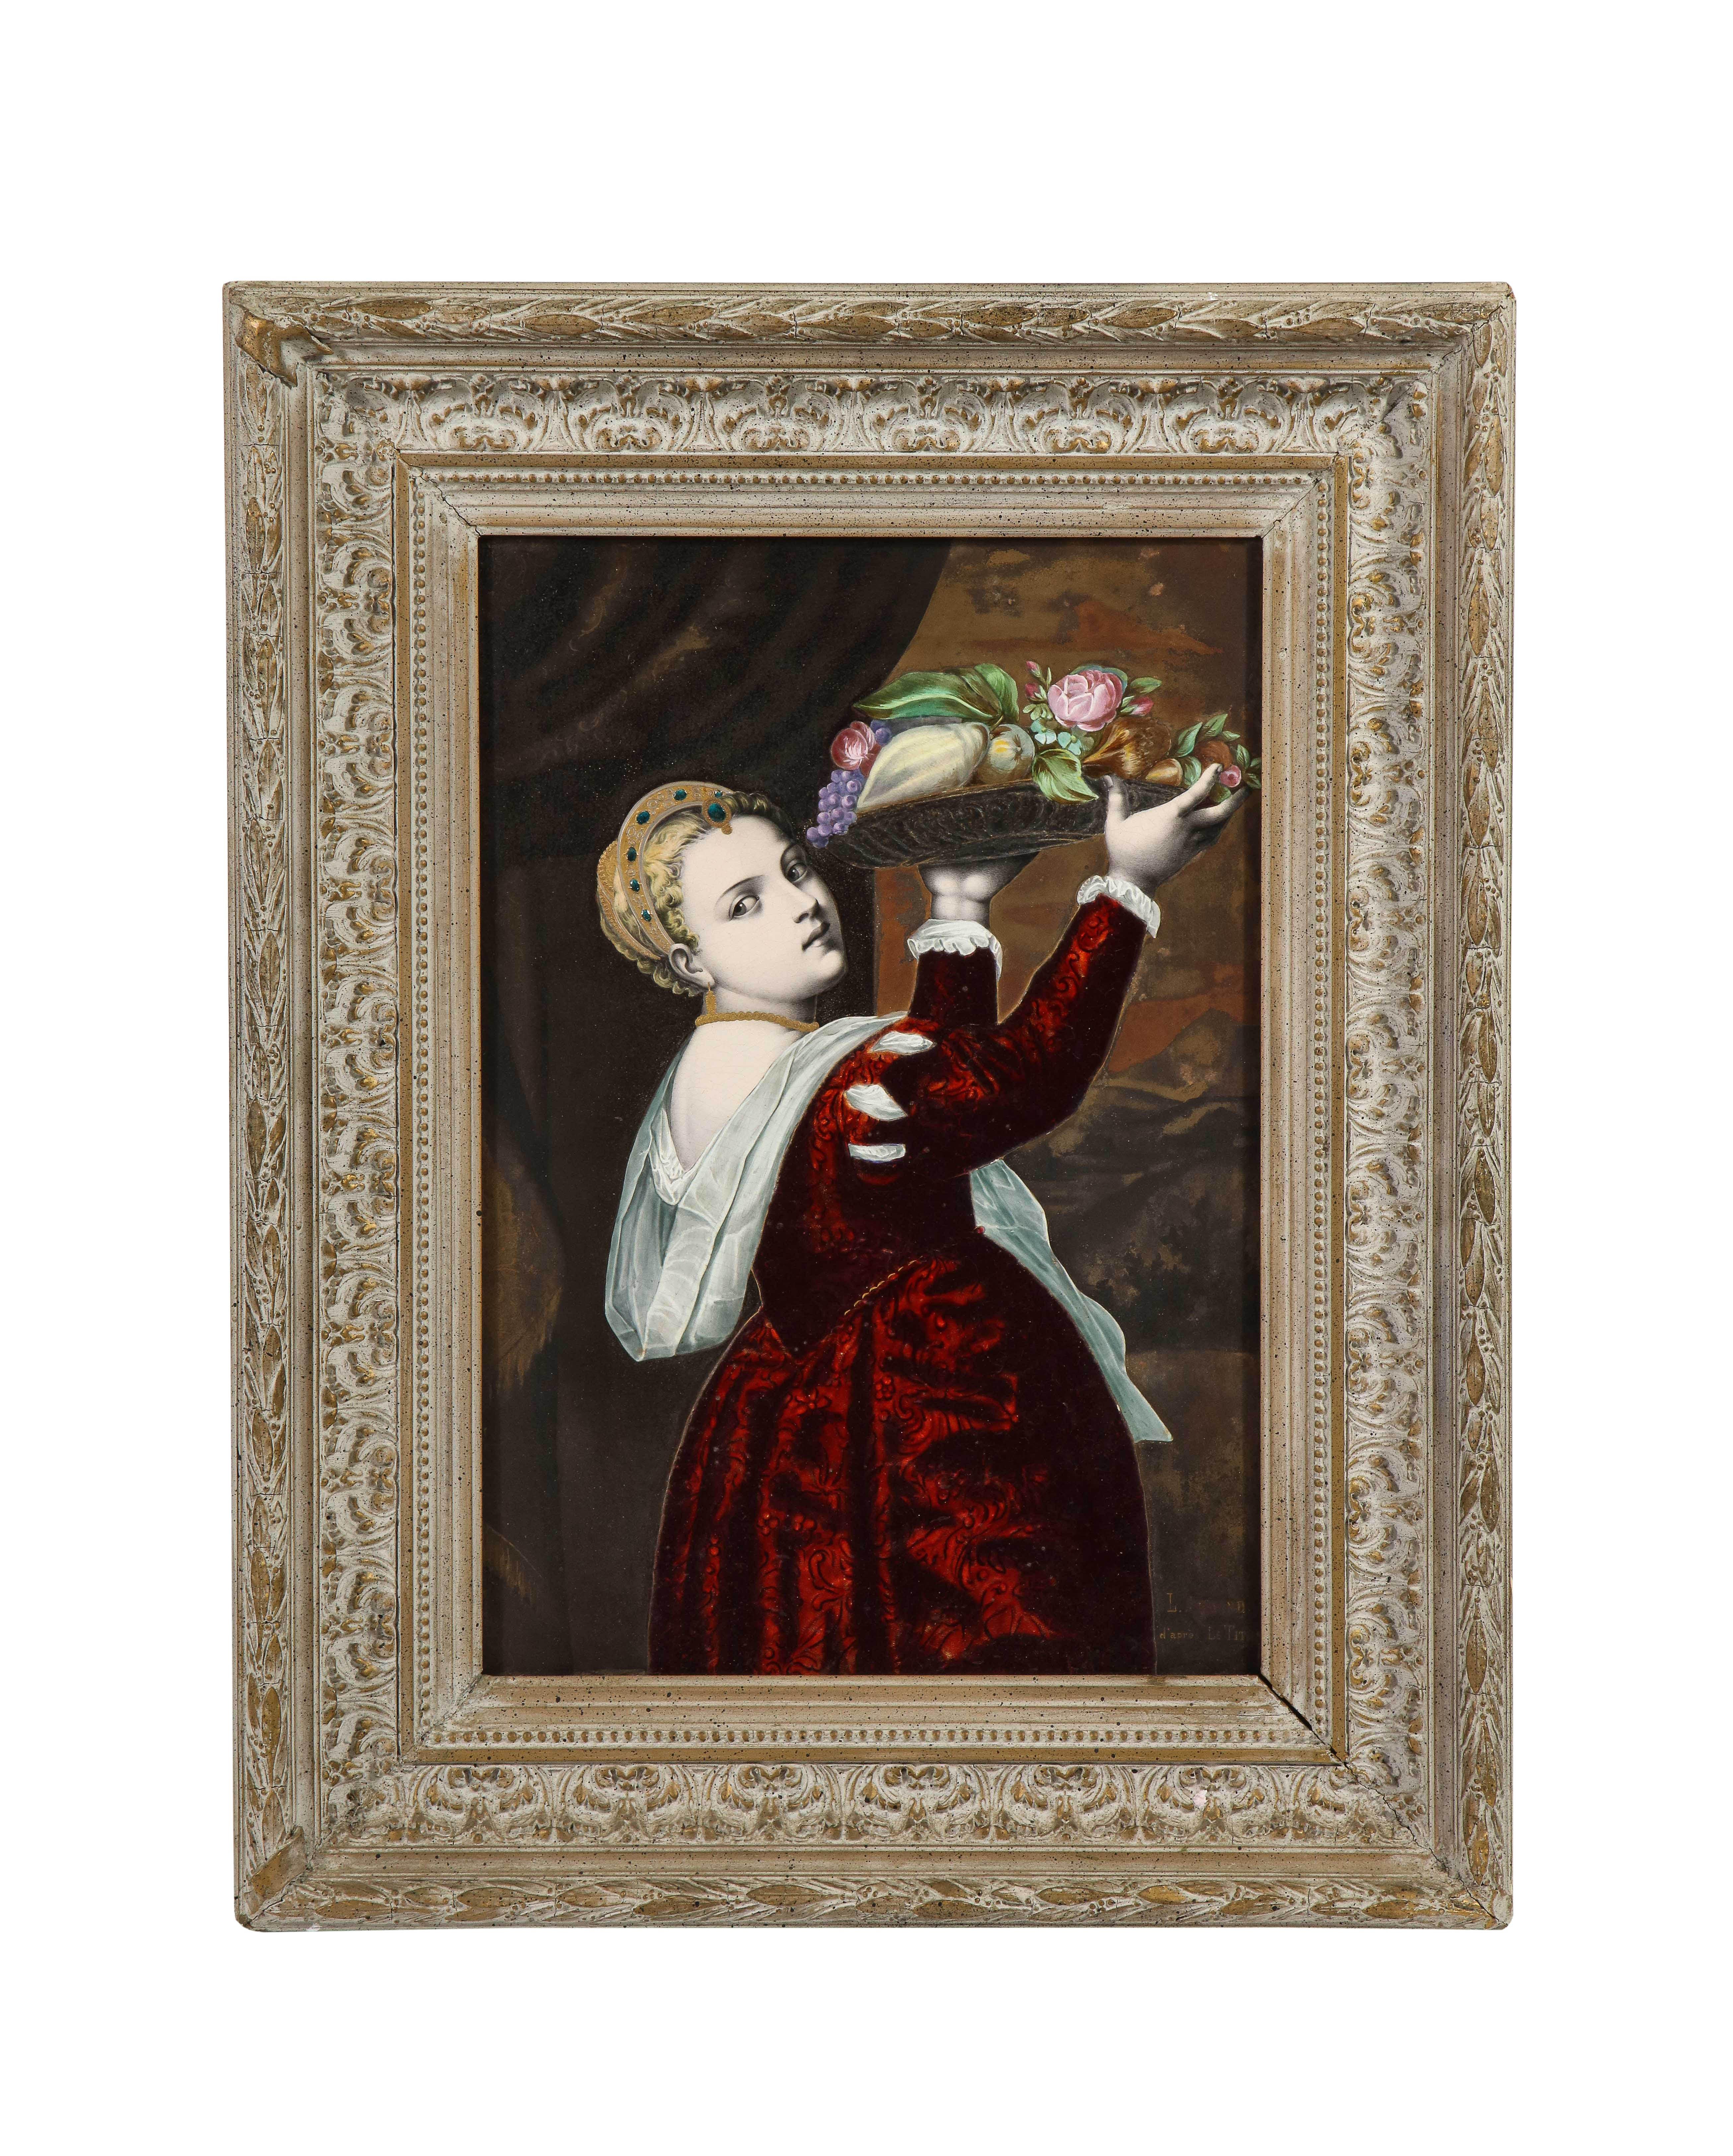 Unknown Portrait Painting - Gorgeous French Maroon Limoges Enamel Porcelain Plaque Woman With Fruits, Titian